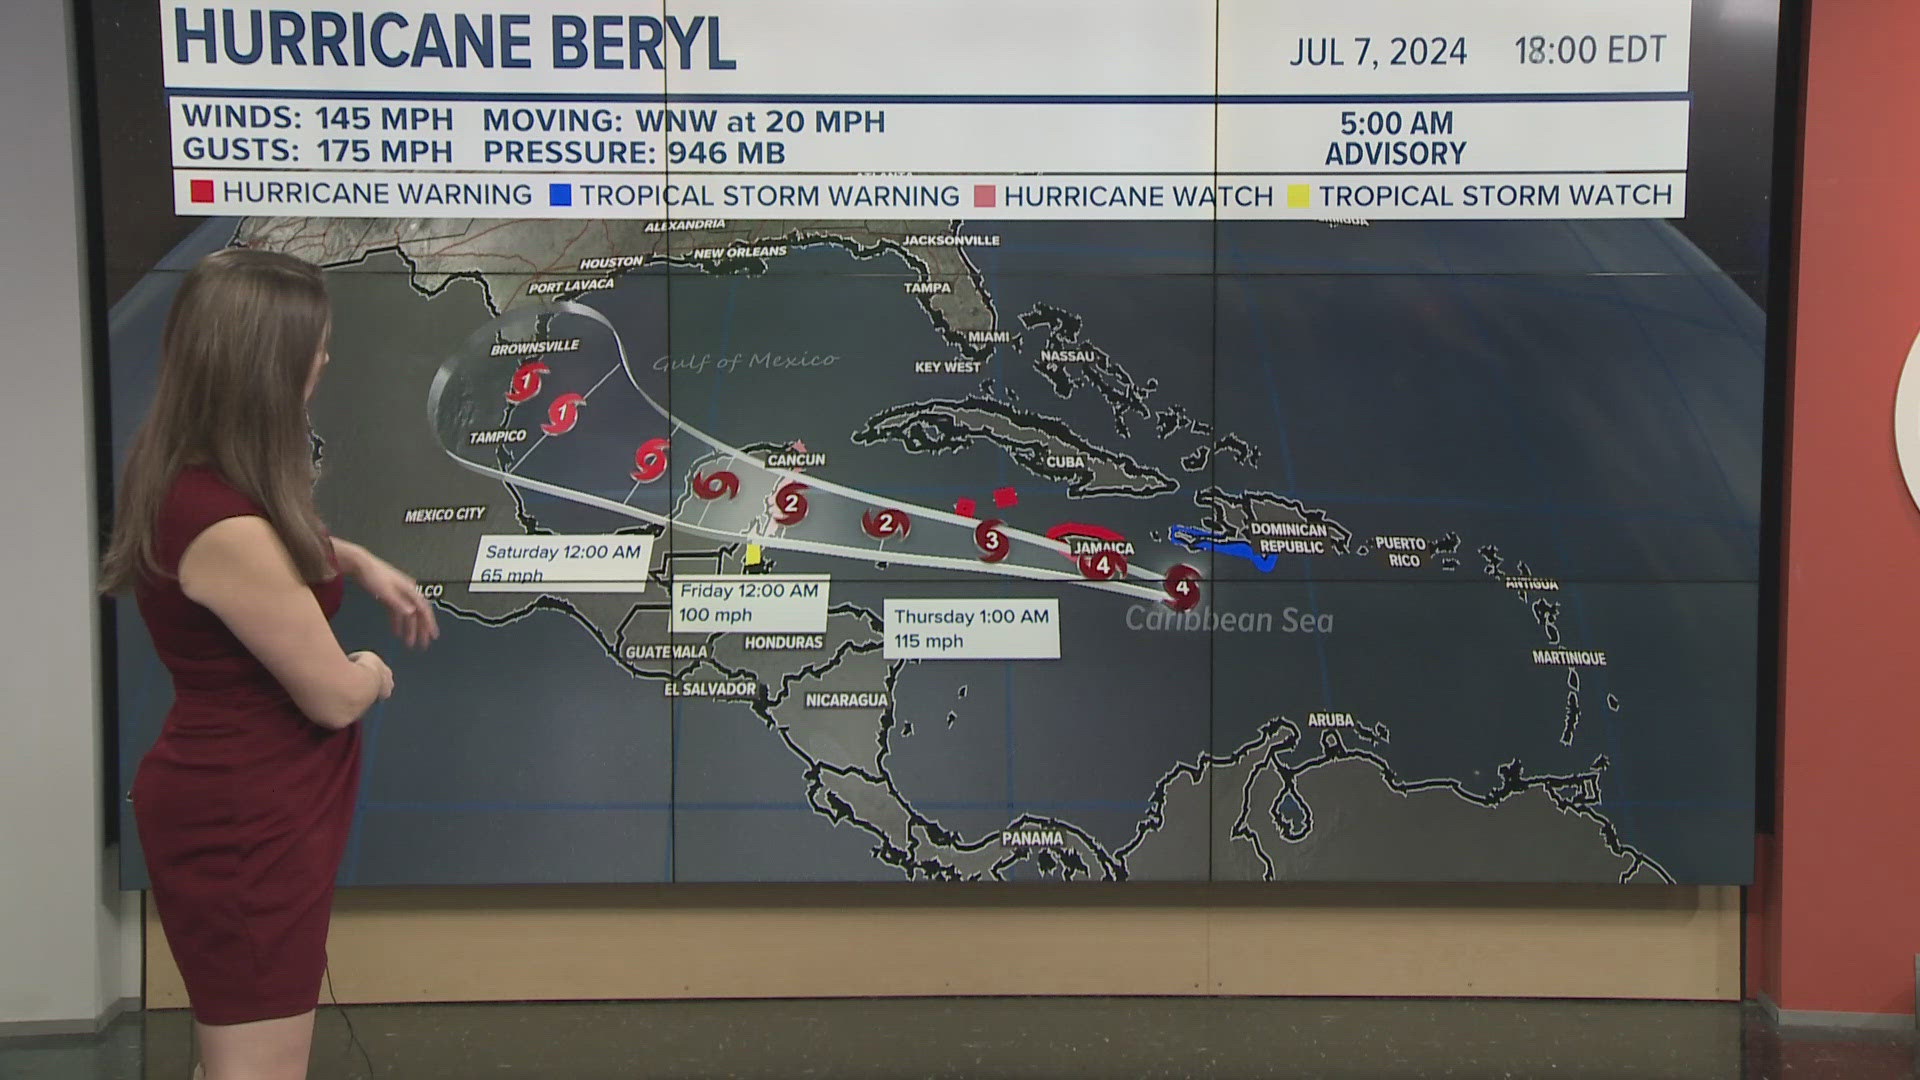 Hurricane Beryl is roaring toward Jamaica as islanders scramble to make preparations after the powerful Category 4 storm earlier killed at least six people.